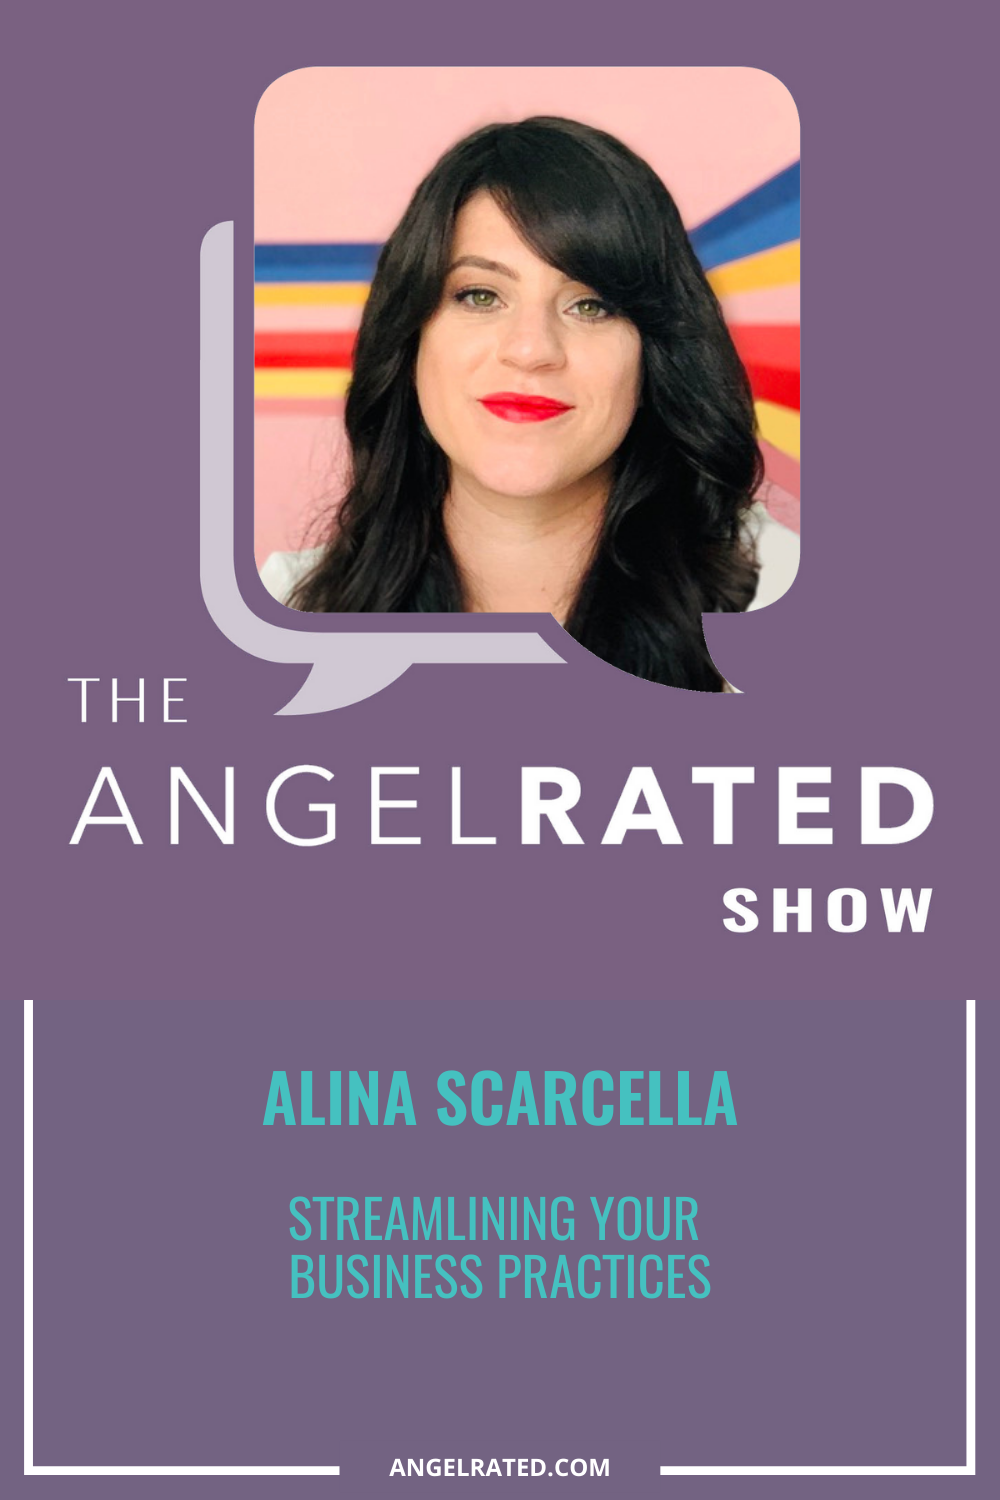 Alina Scarcella: Streamlining your business practices